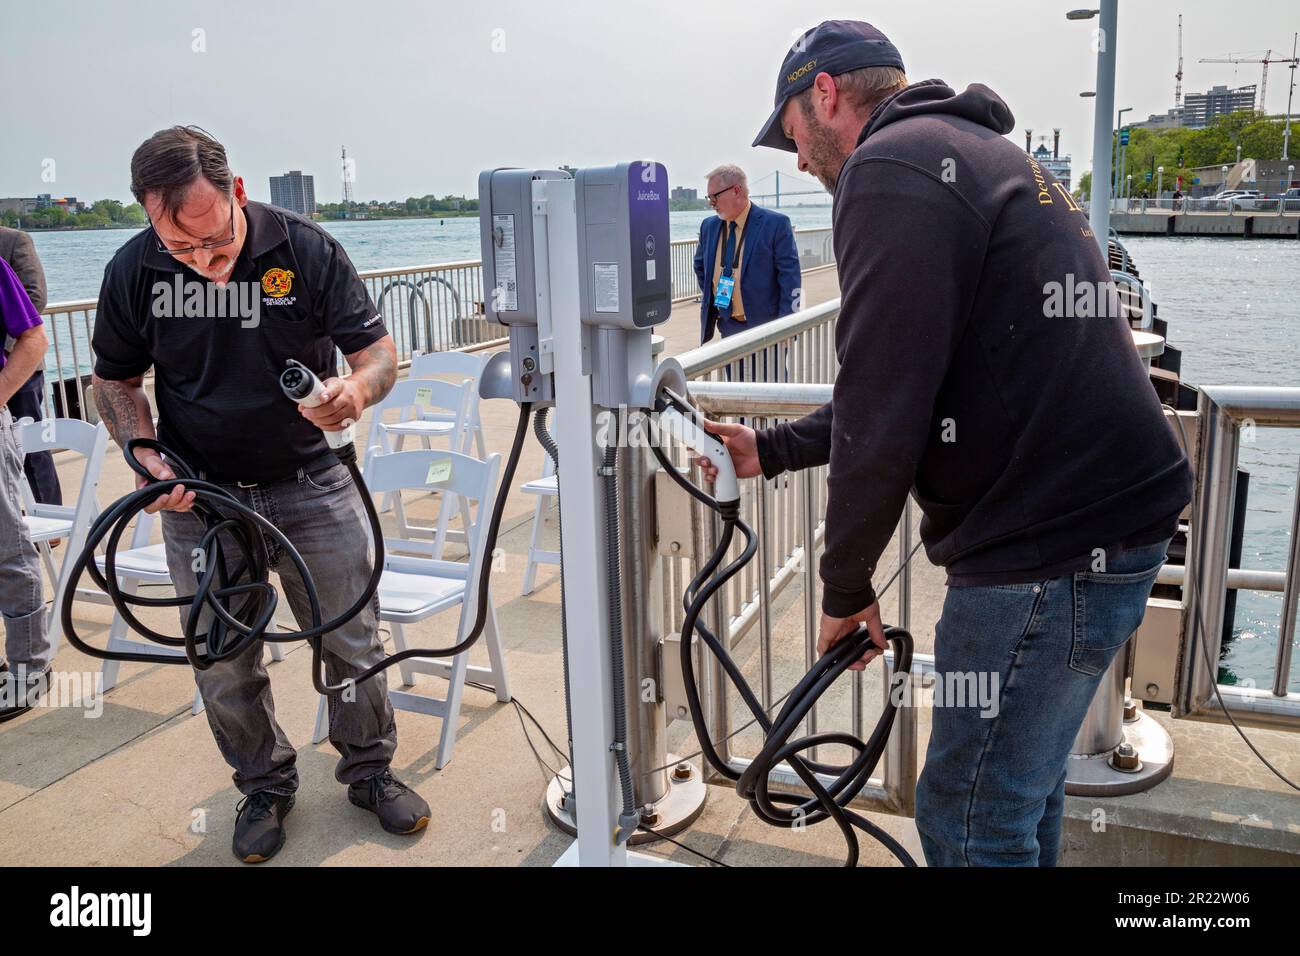 Detroit, Michigan, USA. 16th May, 2023. The United States and Canada announced plans for a binational electric vehicle corridor, with DC fast charging stations every 50 miles from Kalamazoo, Michigan to Quebec City, Quebec. Electrical workers, members of IBEW, set up an EV charger before the event. Credit: Jim West/Alamy Live News Stock Photo